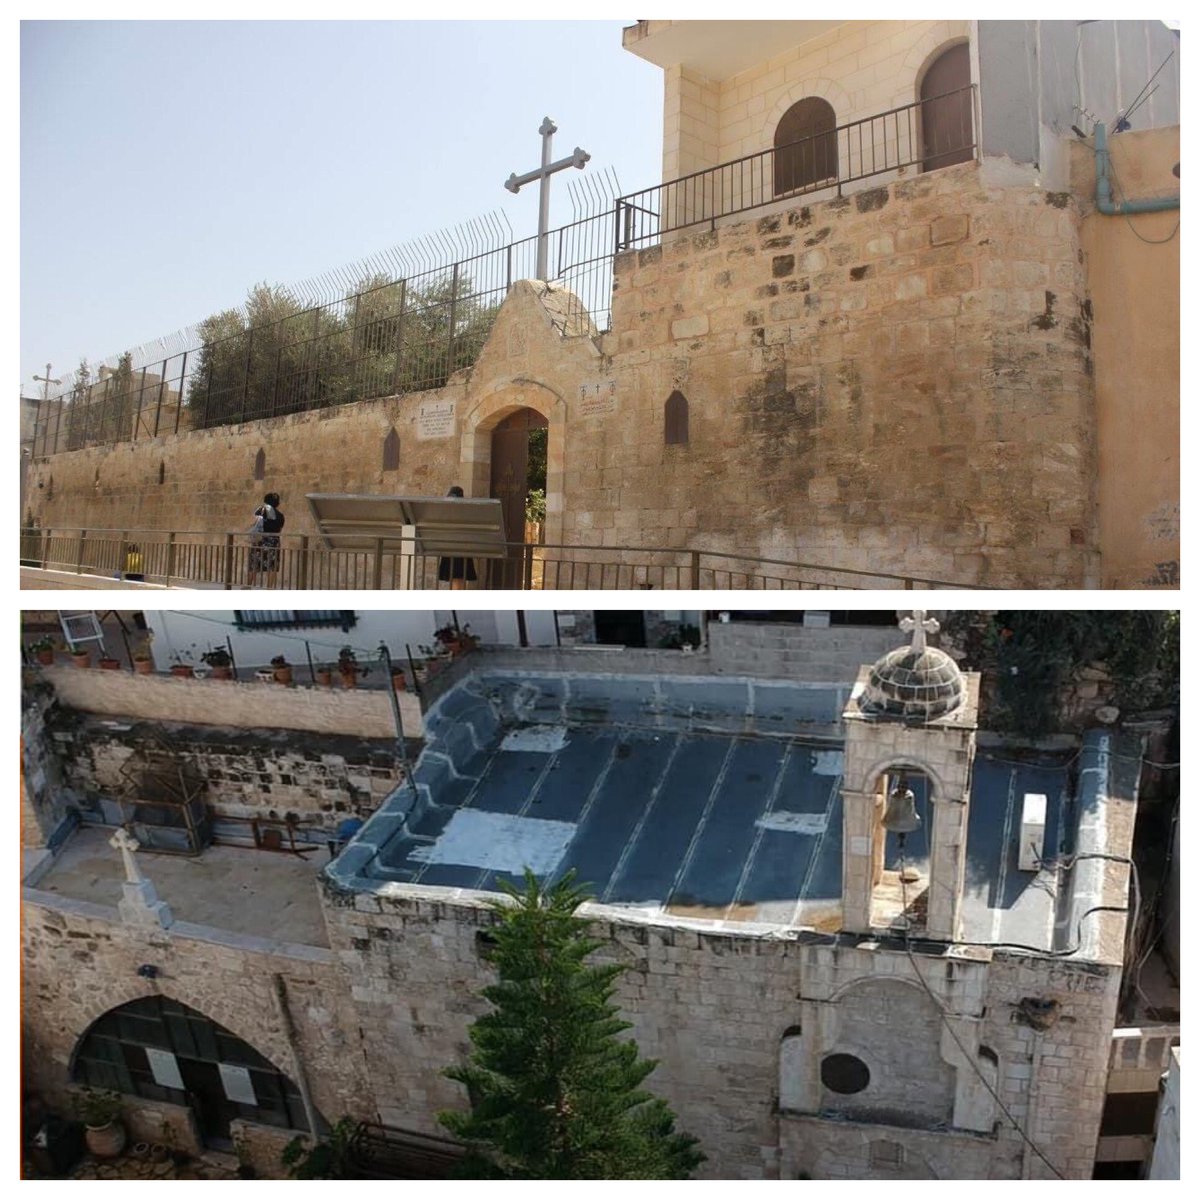 Burqin برقين is a town in Jenin. The town has a Christian minority of 20 Palestinian Orthodox families living in. St George Church in Burqin, is one of the oldest churches, and the site where Jesus cured the ten lepers on his way to Galilee (Luke 17:11-19).